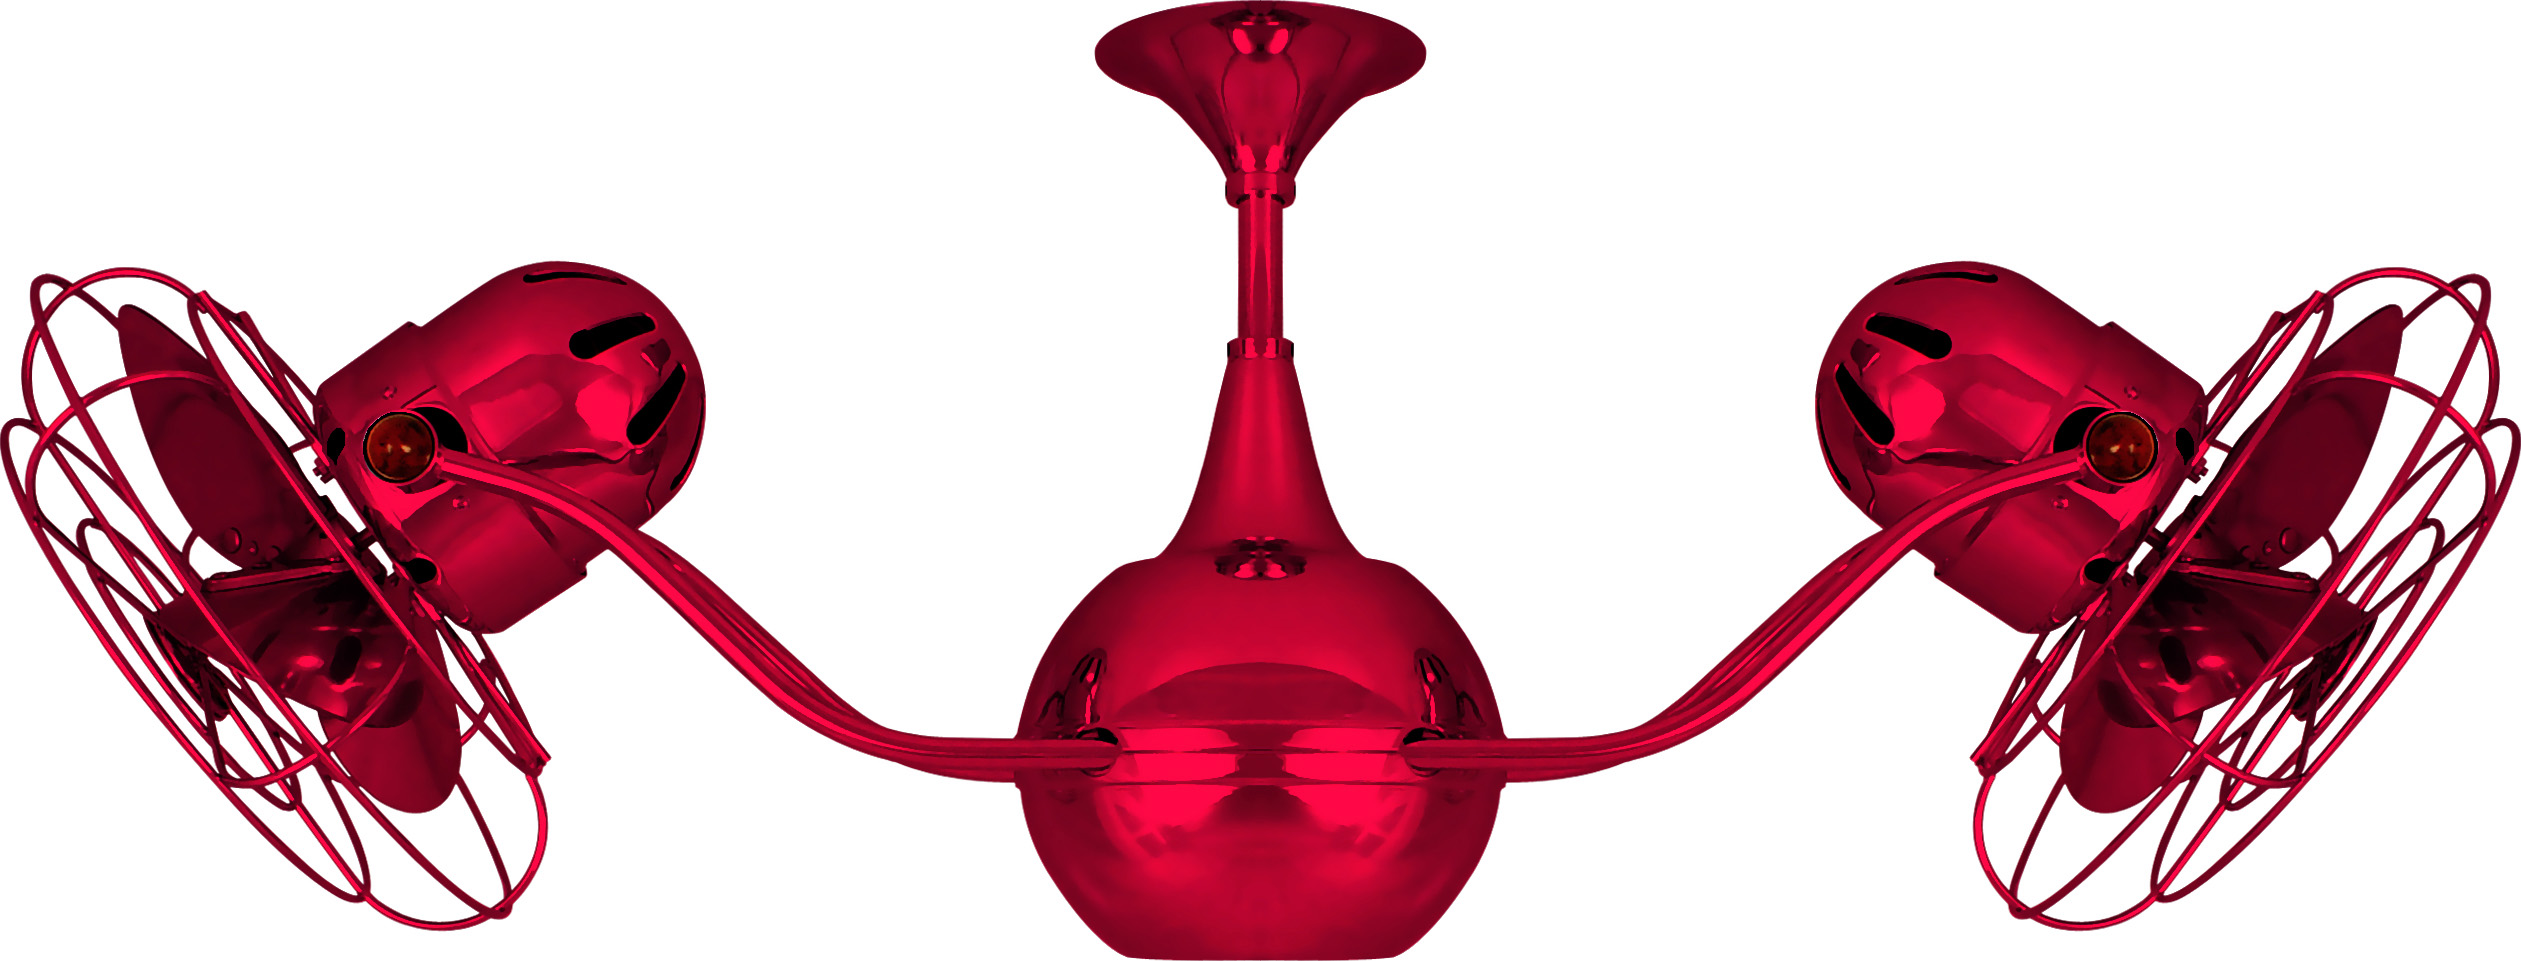 Vent-Bettina Rotational Dual Head Ceiling Fan in Rudi / Red Finish with Metal Blades and Decorative Cage